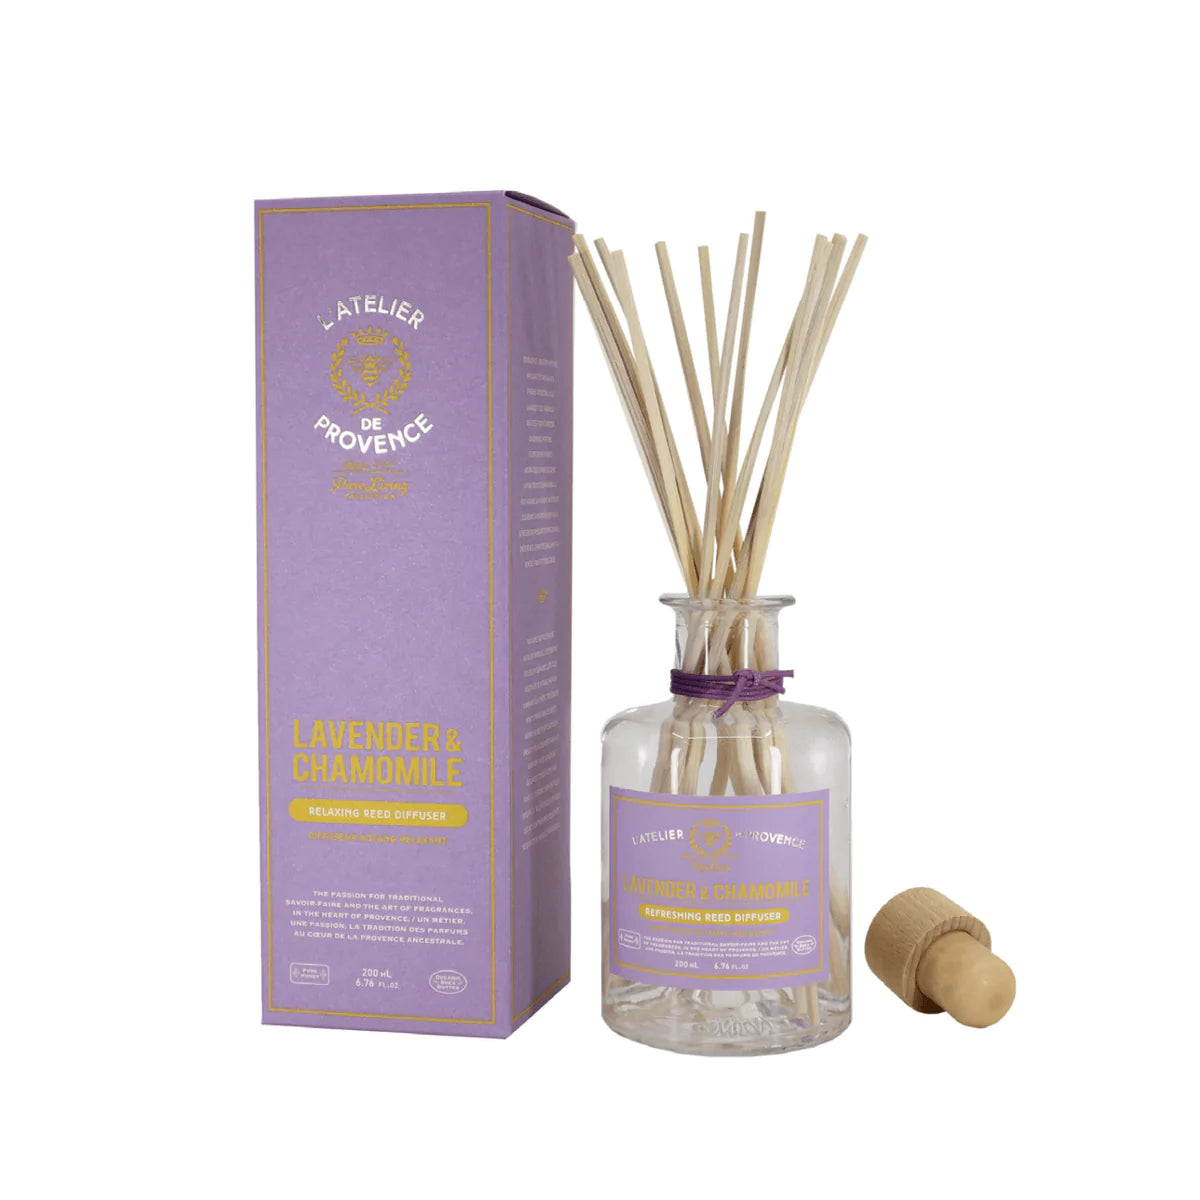 L'Atelier de Provence - Lavender & Chamomile Relaxing Reed Diffuser